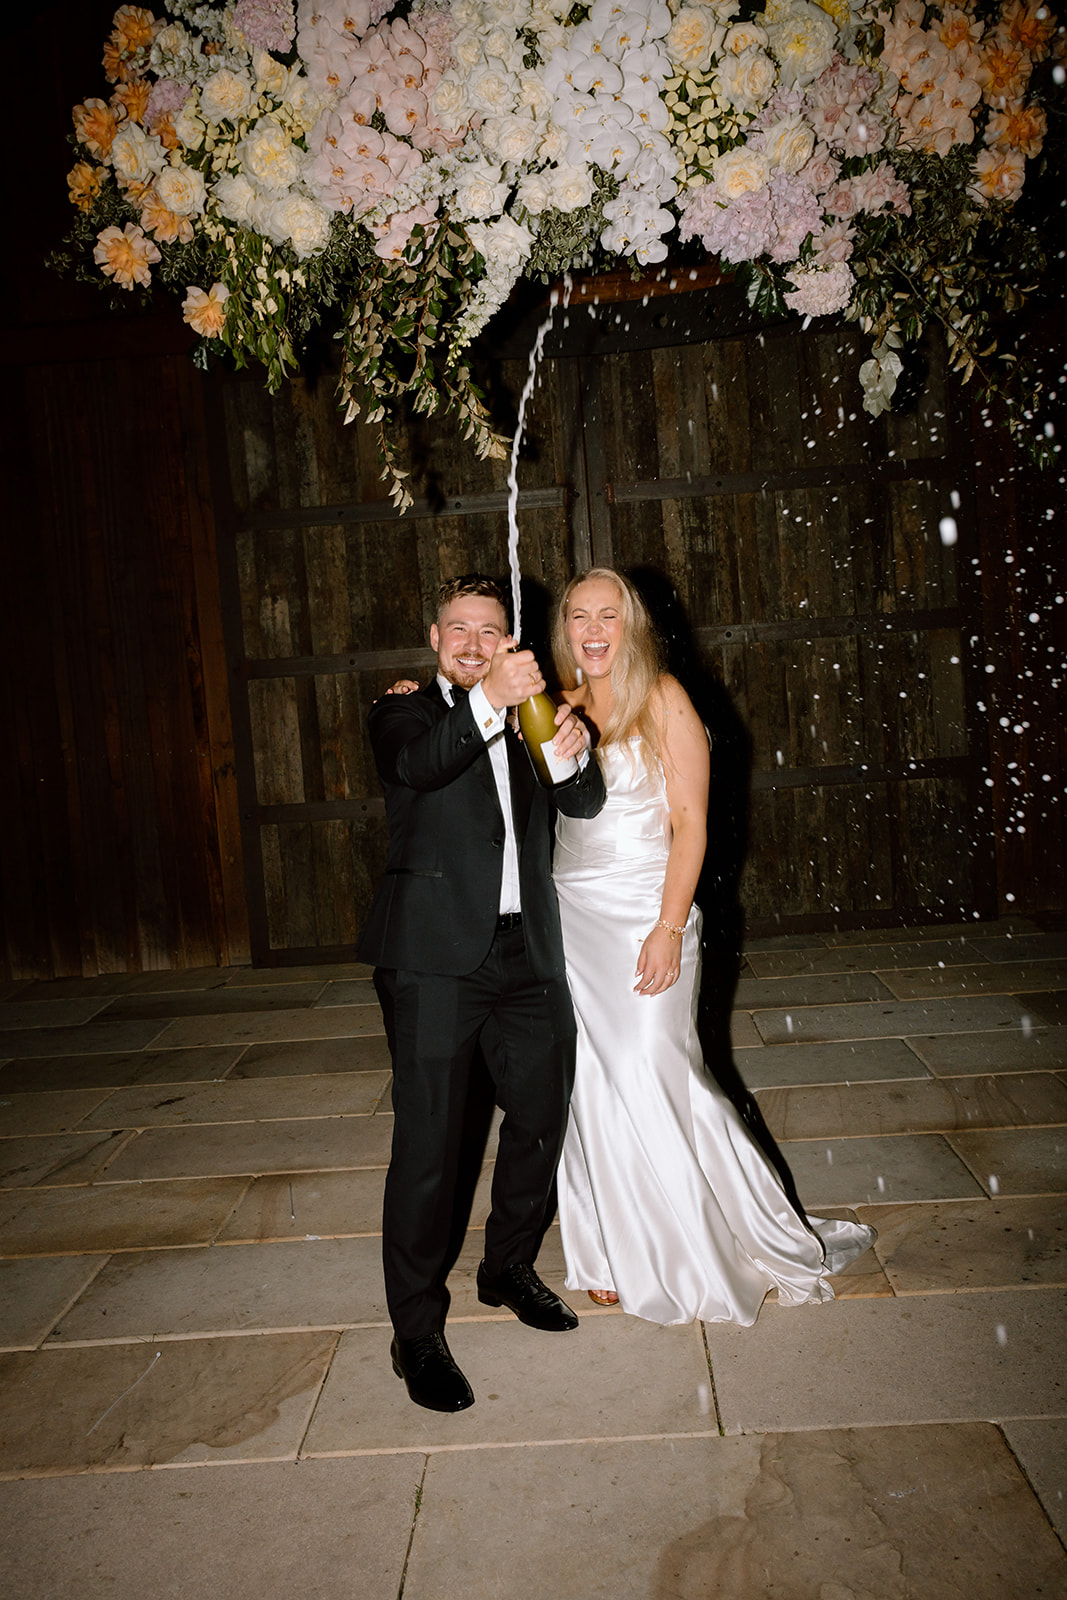 Bride and groom champagne shower at the wedding in the Southern Highlands Bendooley Estate